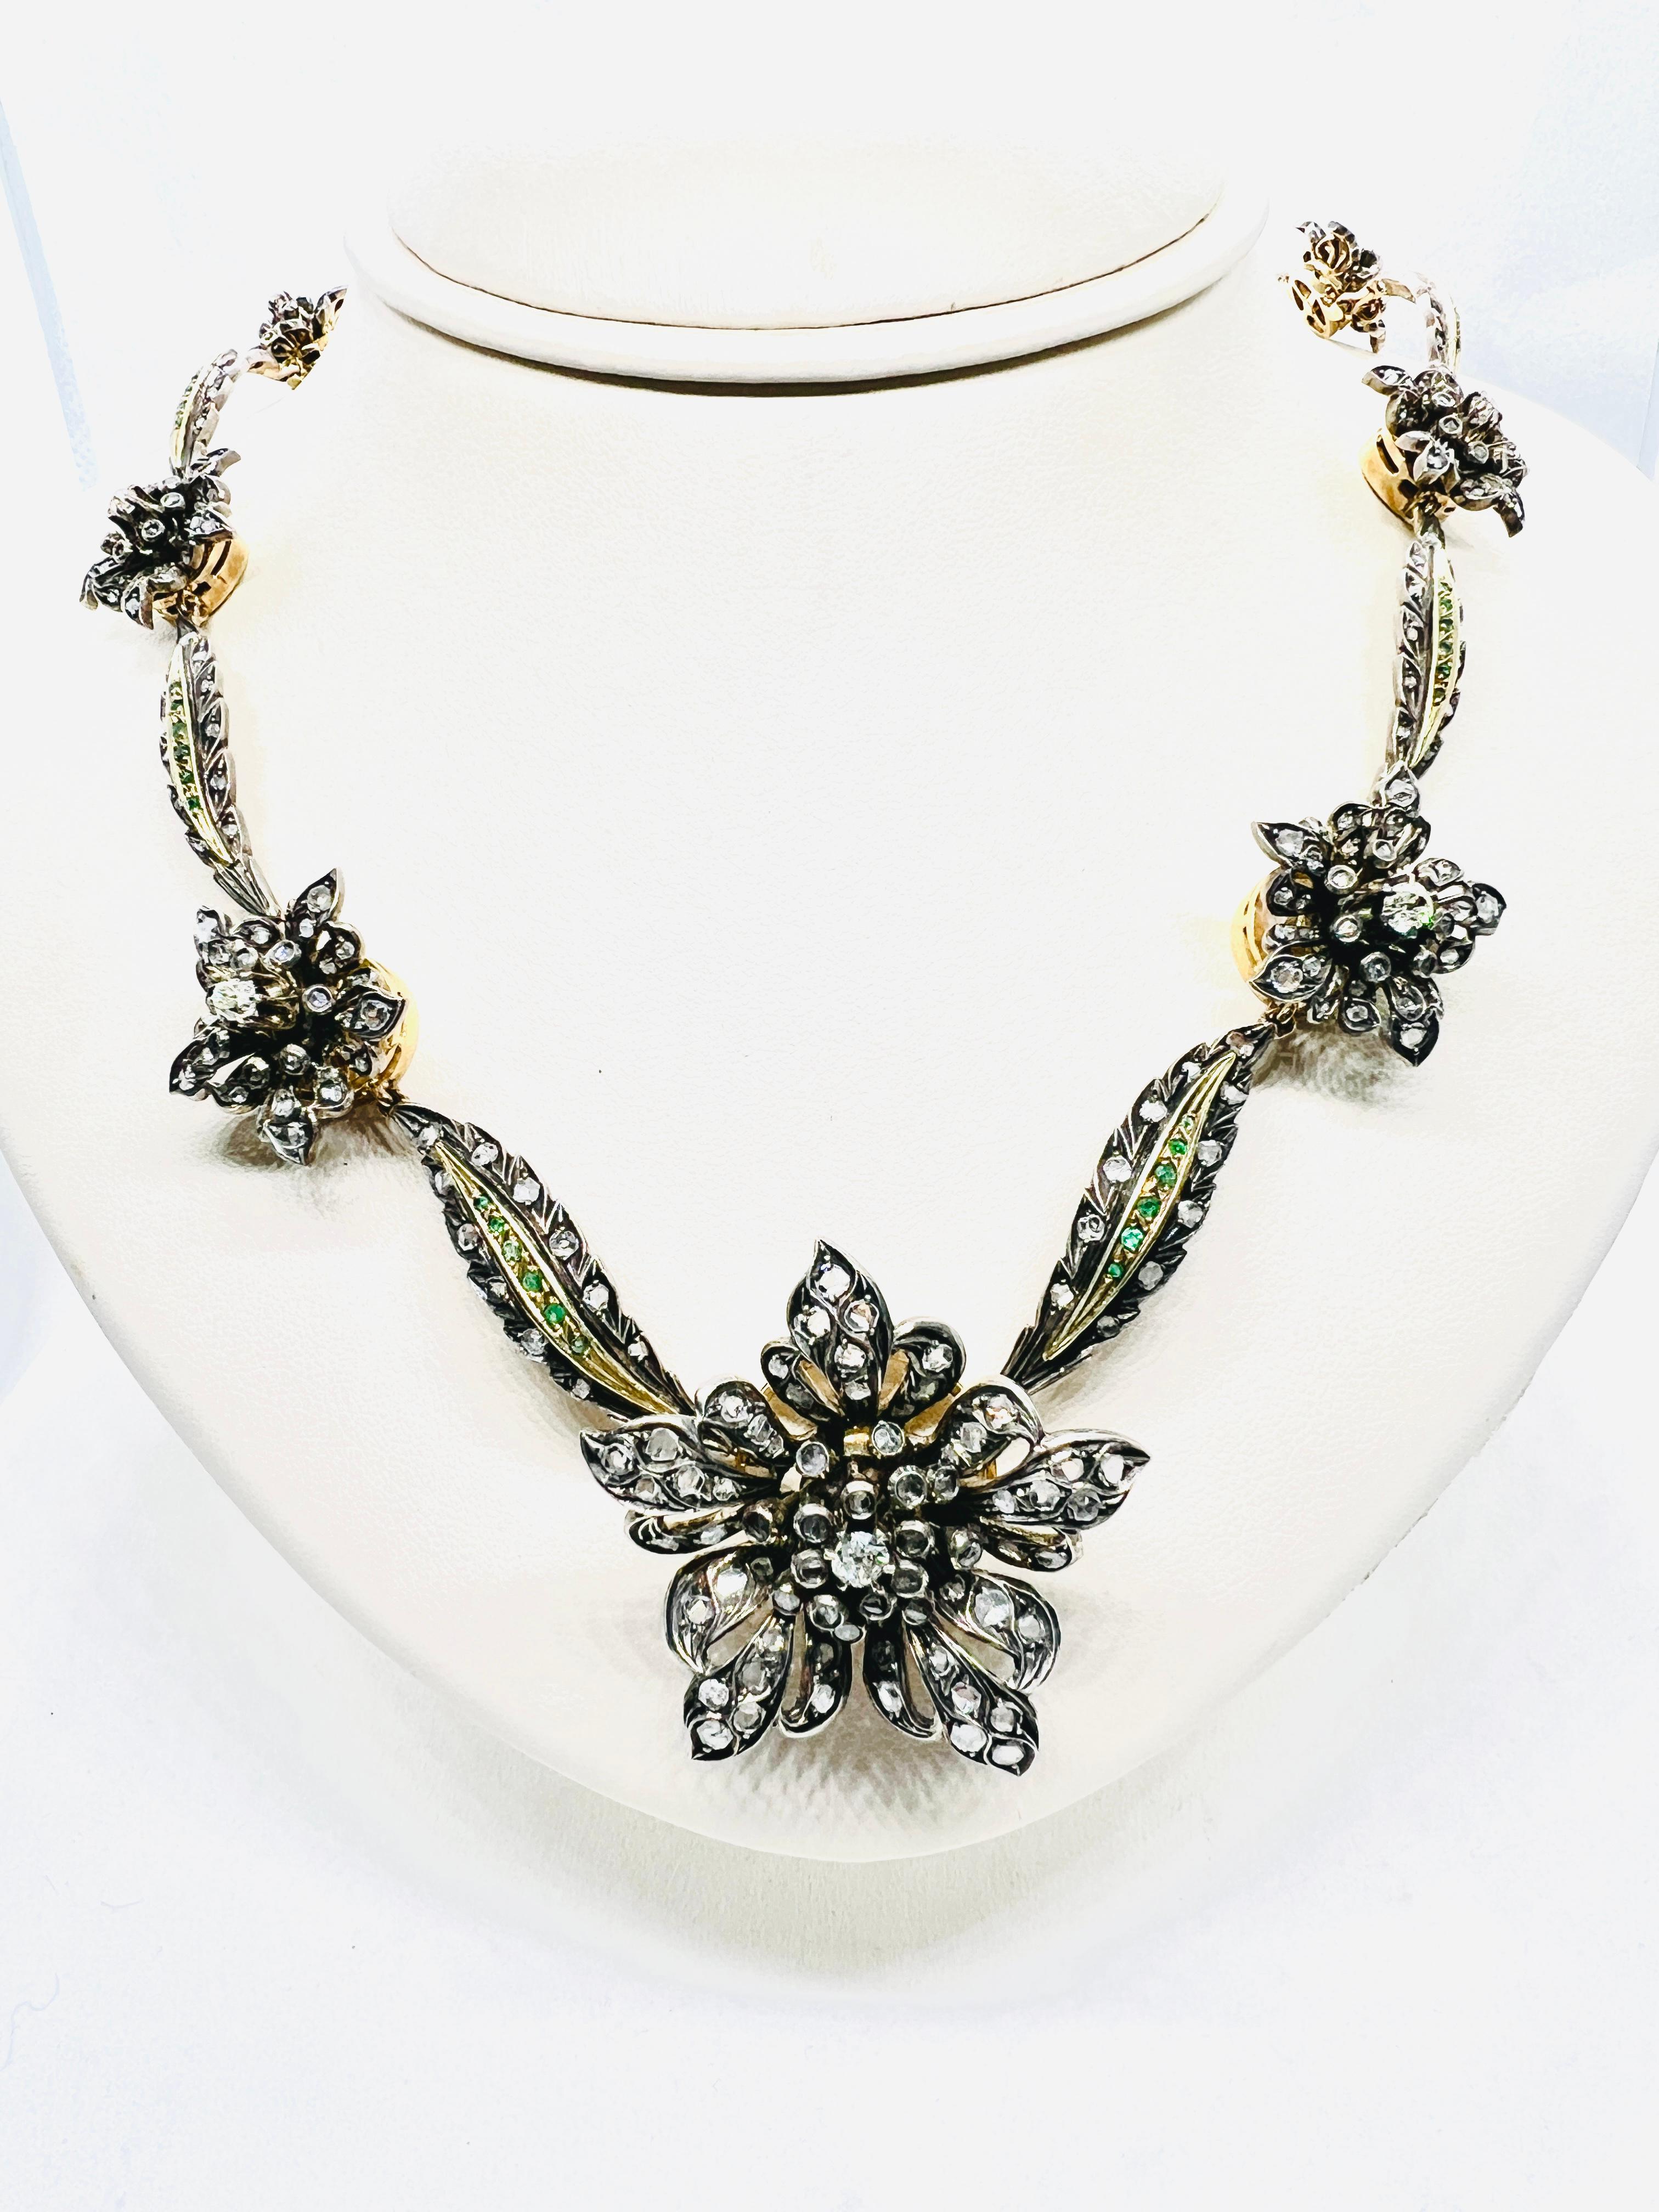 Absolutely Stunning Necklace! It is made in sterling silver and 18 Kt Yellow Gold. It features Old Mine cut and rose cut diamonds that form ten stations of flowers set 